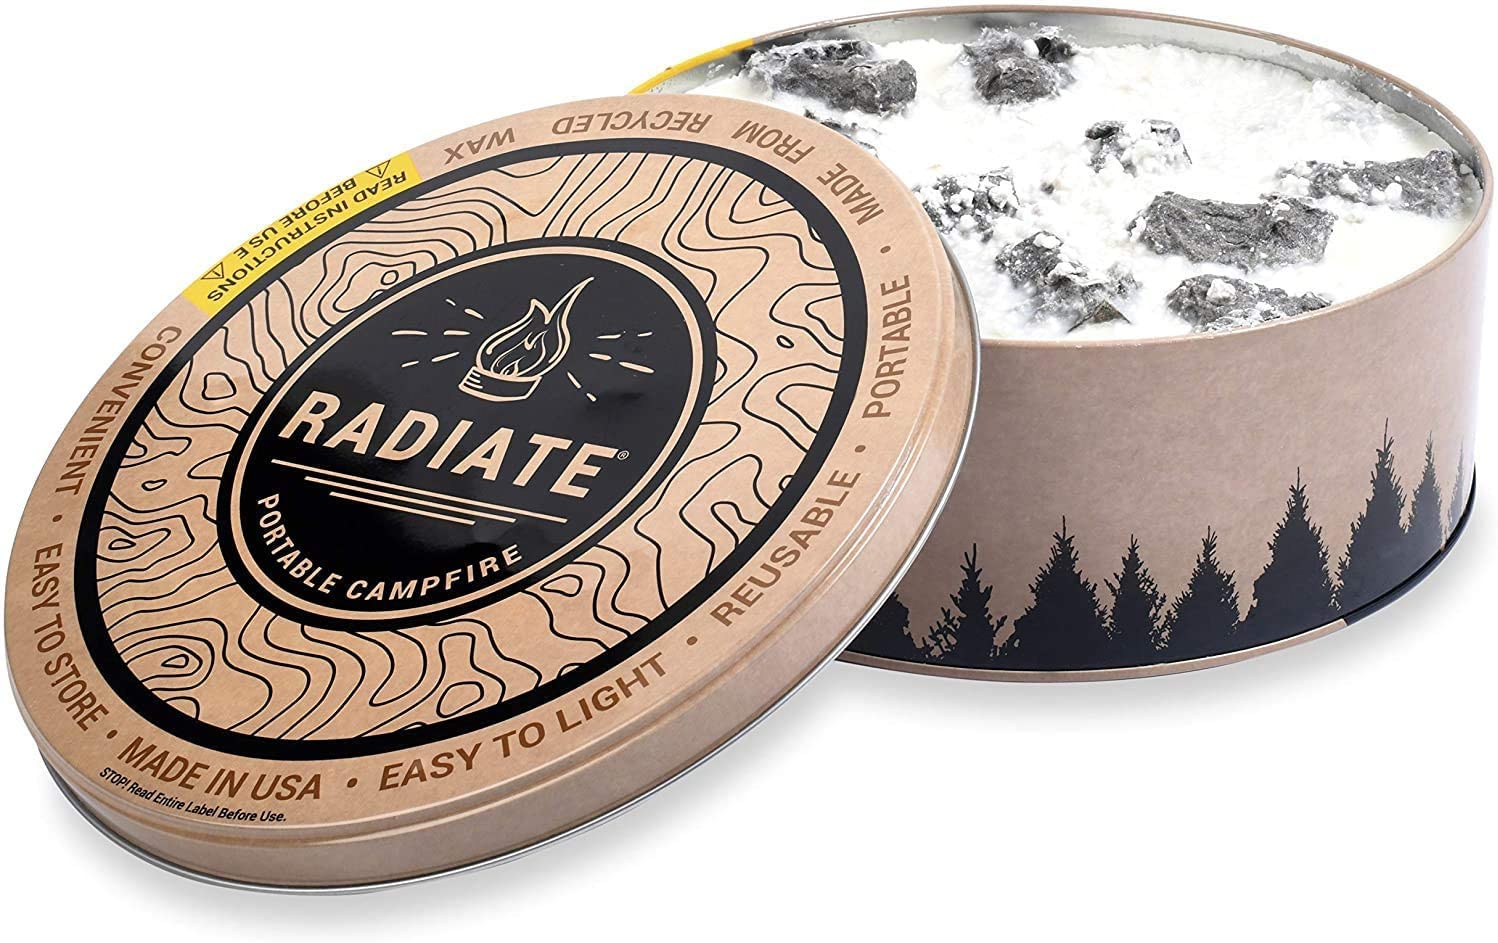 Radiate Portable Campfire: The Original Go-Anywhere Campfire | Lightweight and Portable | 3-5 Hours of Bright and Warm Burn Time | Convenient-No Embers-No Hassle | Made in USA | Original 1 Pack - image 1 of 7